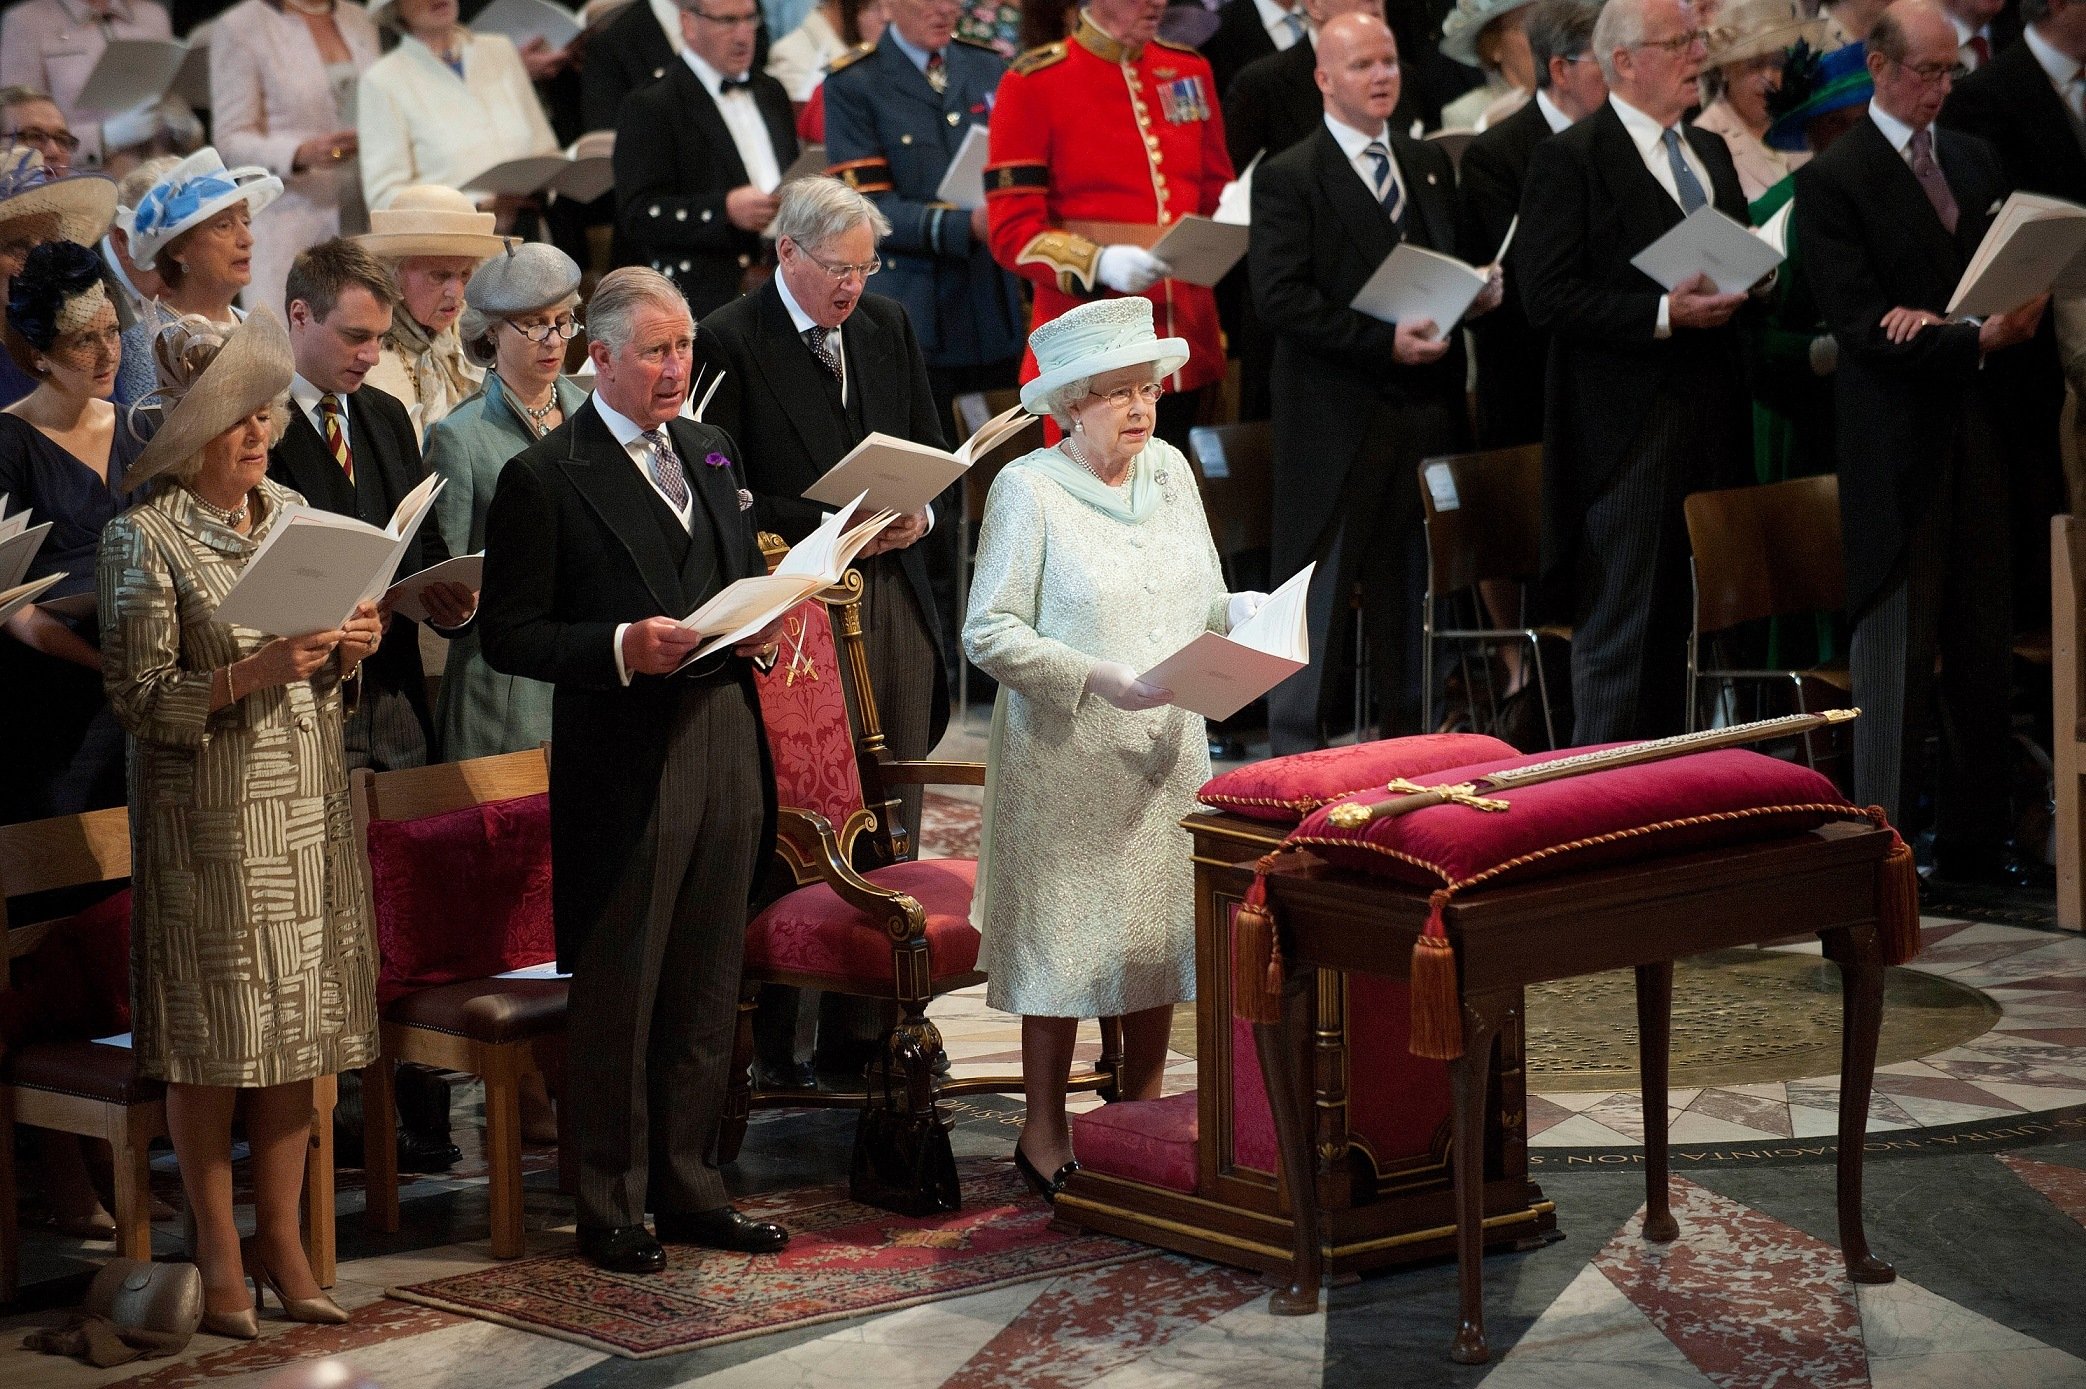 Queen Elizabeth and Royal Family at church